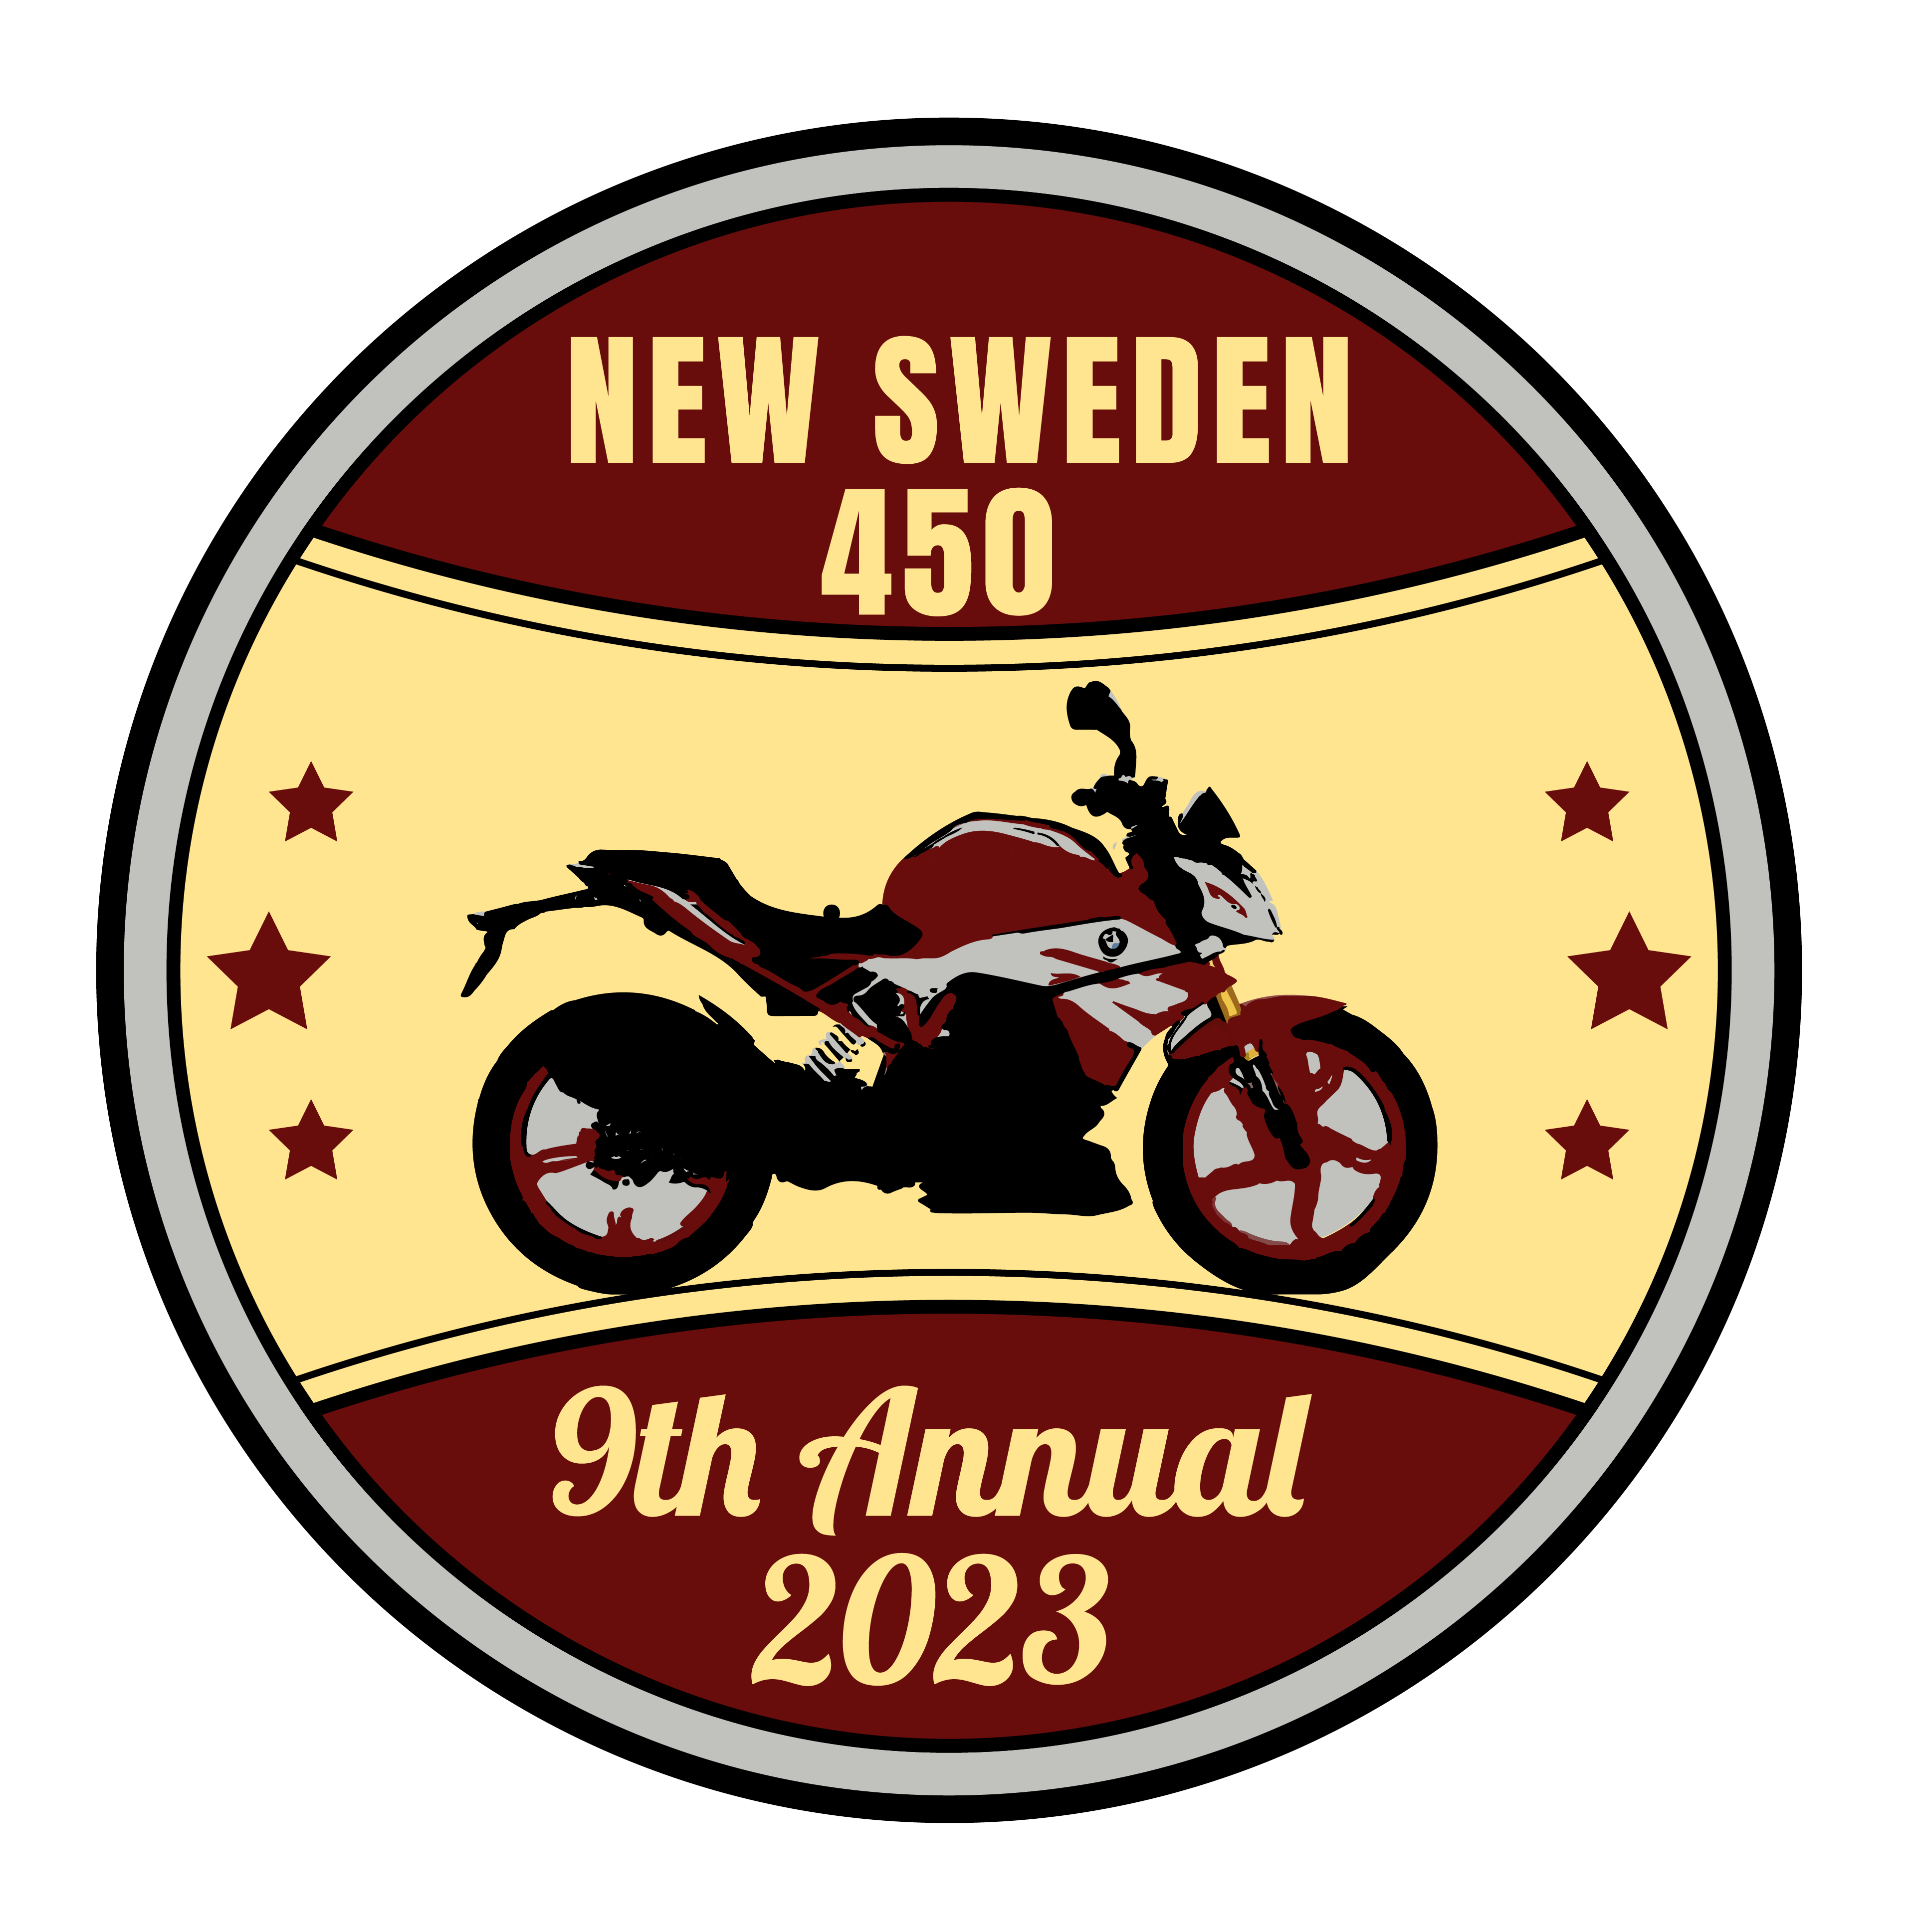 The New Sweden Riders are a rally sponsor